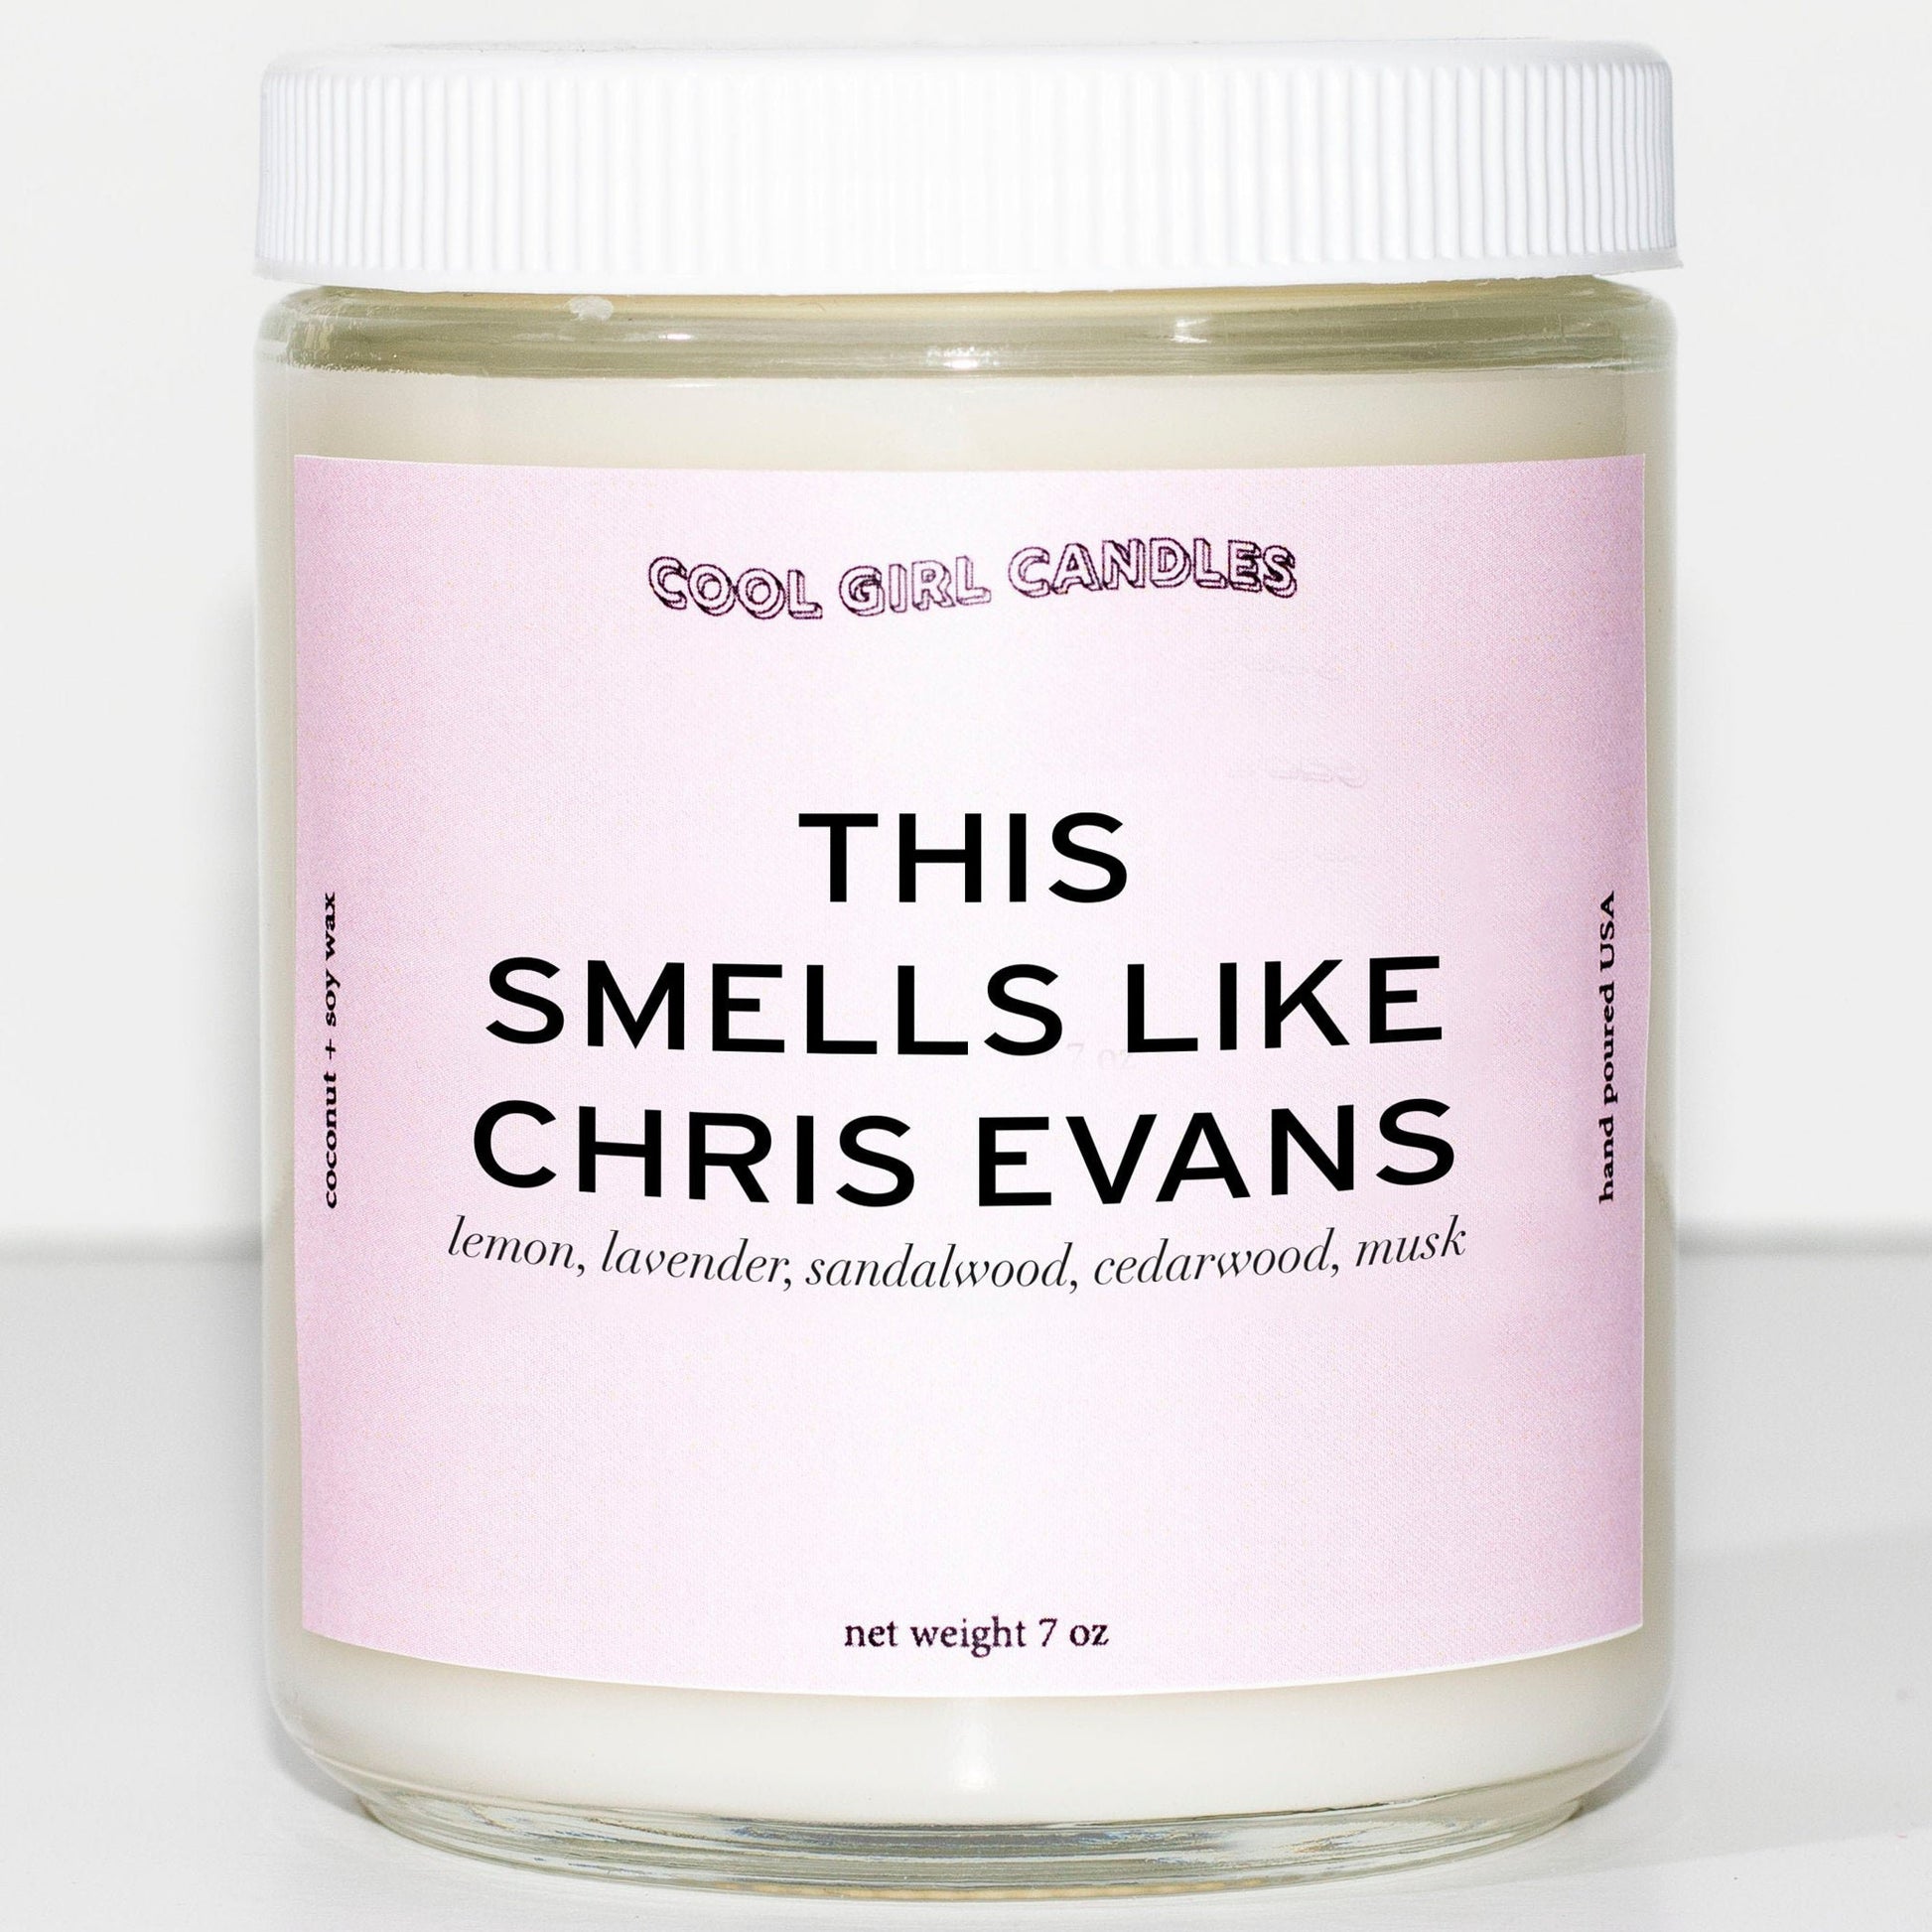 this smells like chris evans candle cute aesthetic captain america marvel candle merch